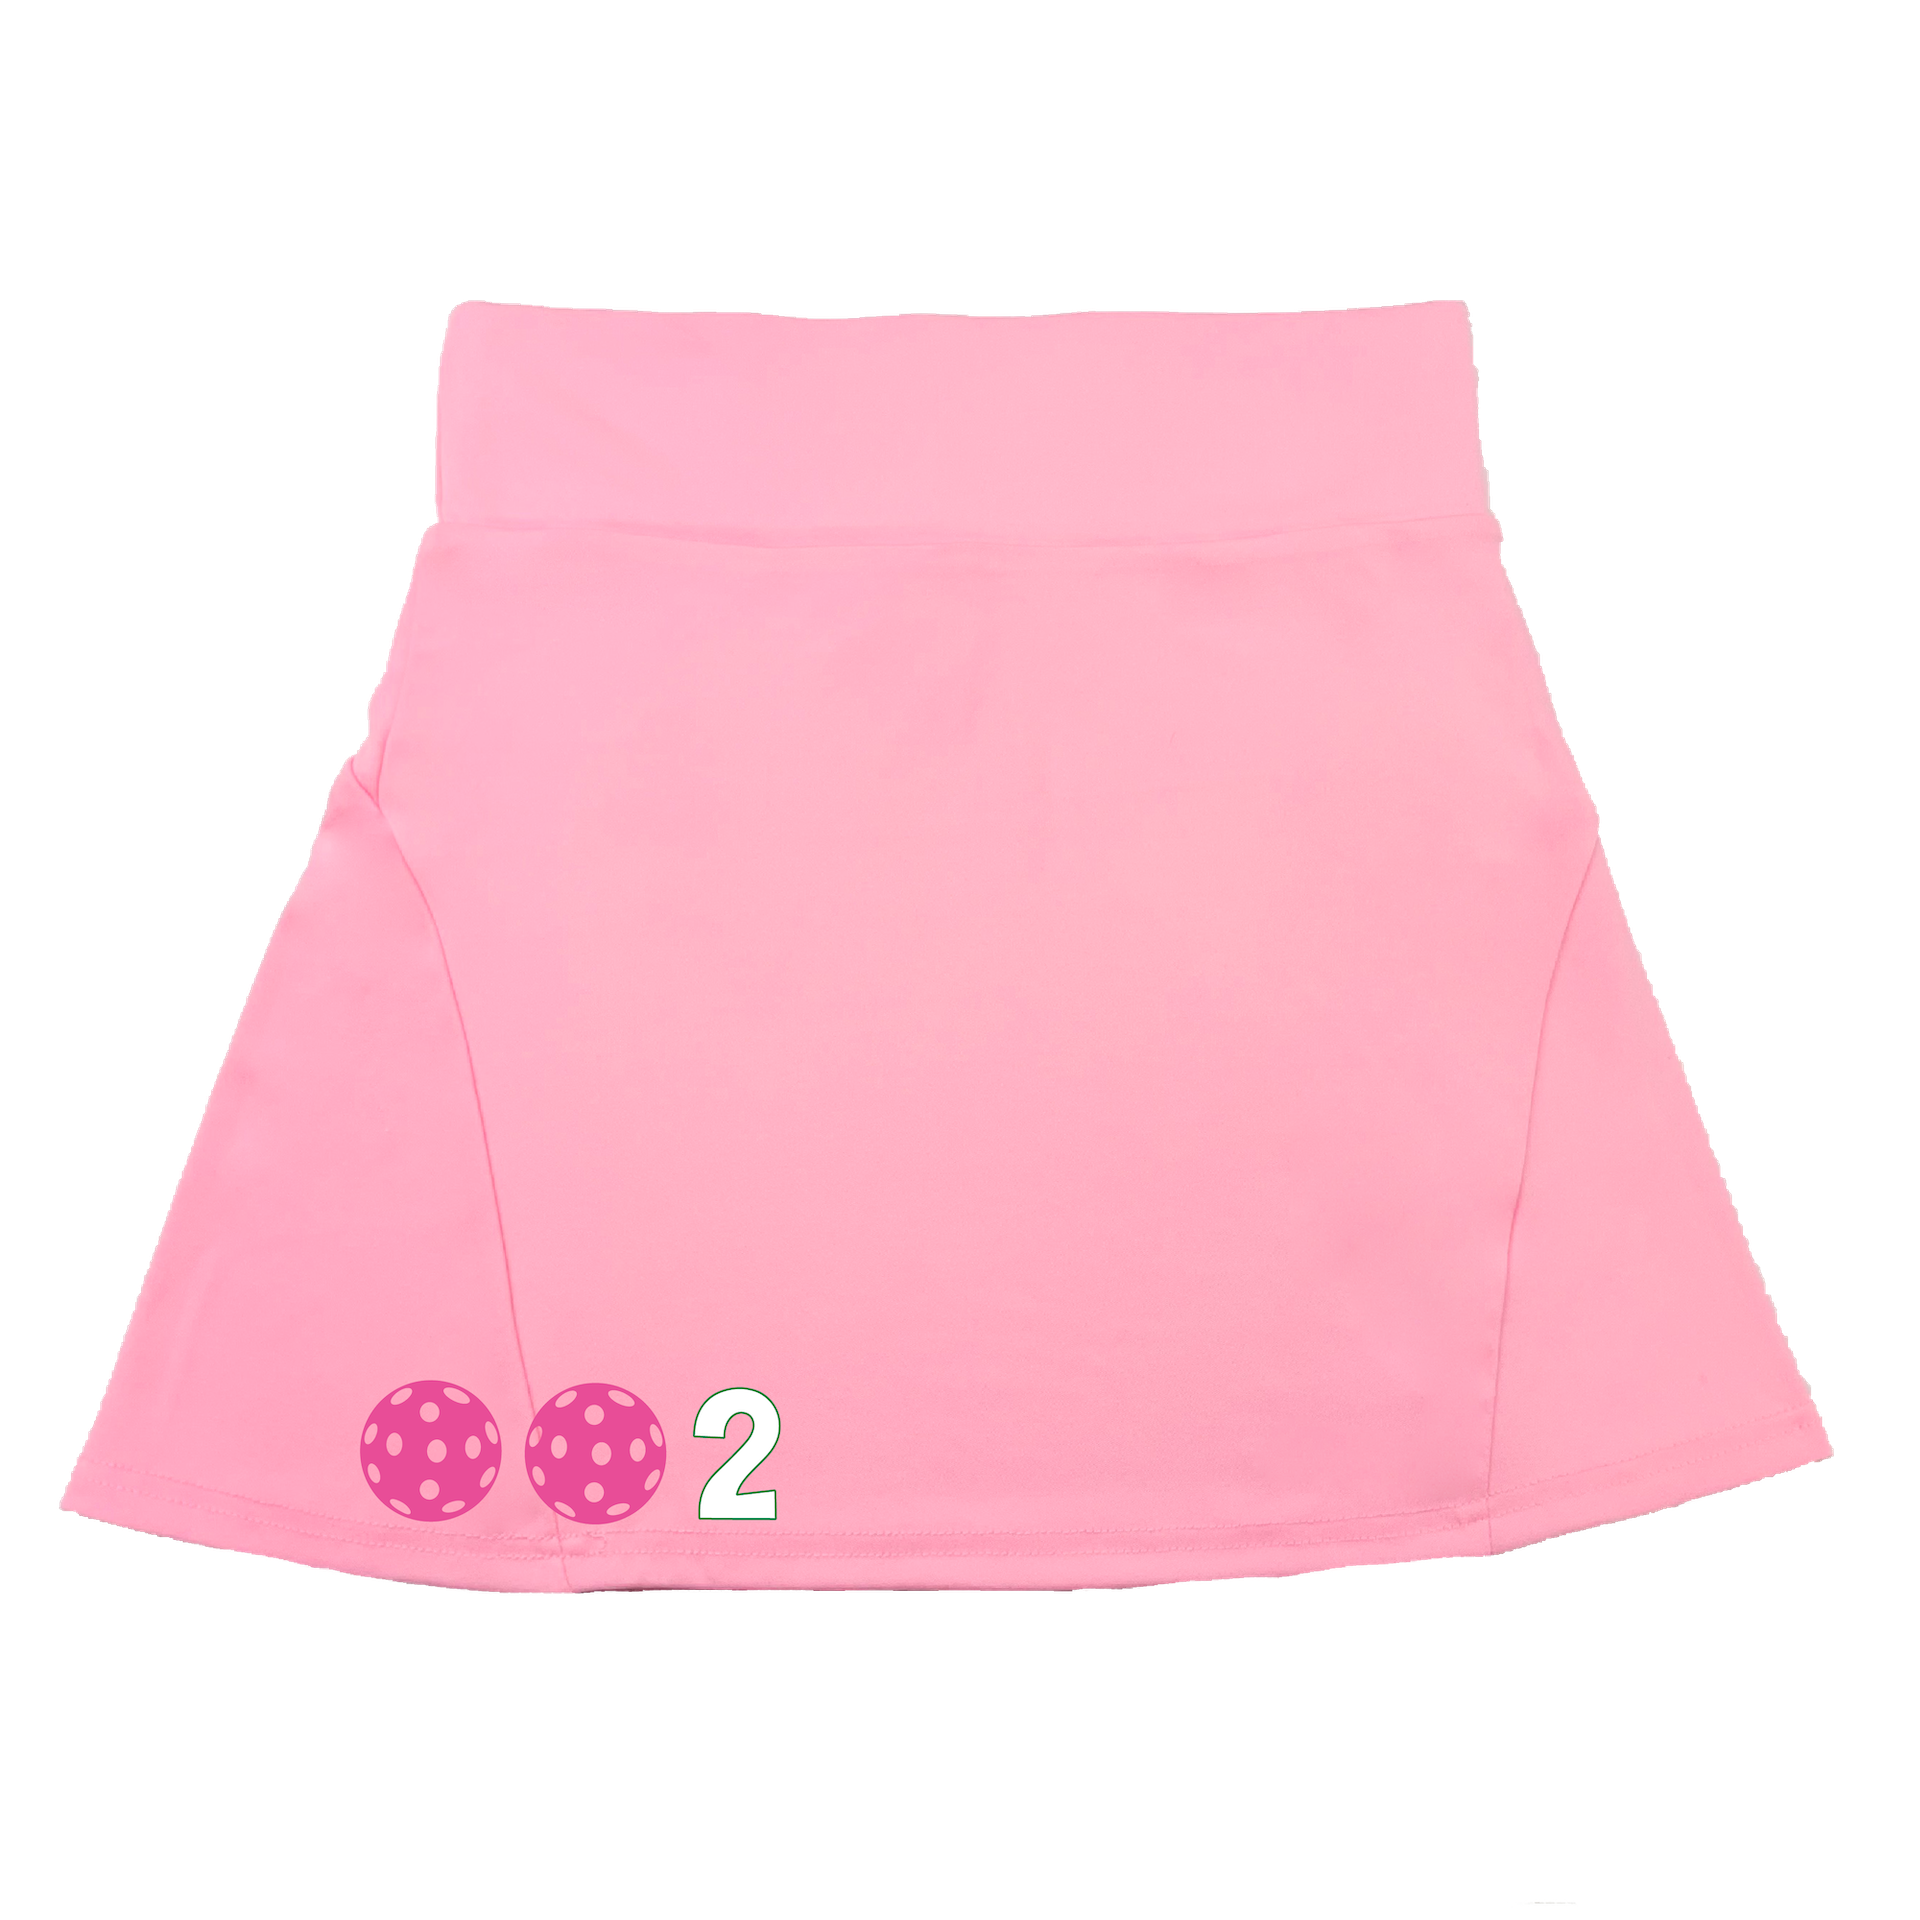 Pickleball Flirty Skort Design: 002 Customizable Pickleball Ball color:  Choose: White - Green -Yellow or Pink.  These flirty skorts have a flat mid-rise waistband with a 3 inch waistband.  Light weight without being see through and the material wicks away moisture quickly.  Flirty pleats in the back with inner shorts for free movement and stylish coverage on the courts.  A functional zipper pocket on the back and two built in pockets on the shorts for convenient storage. 